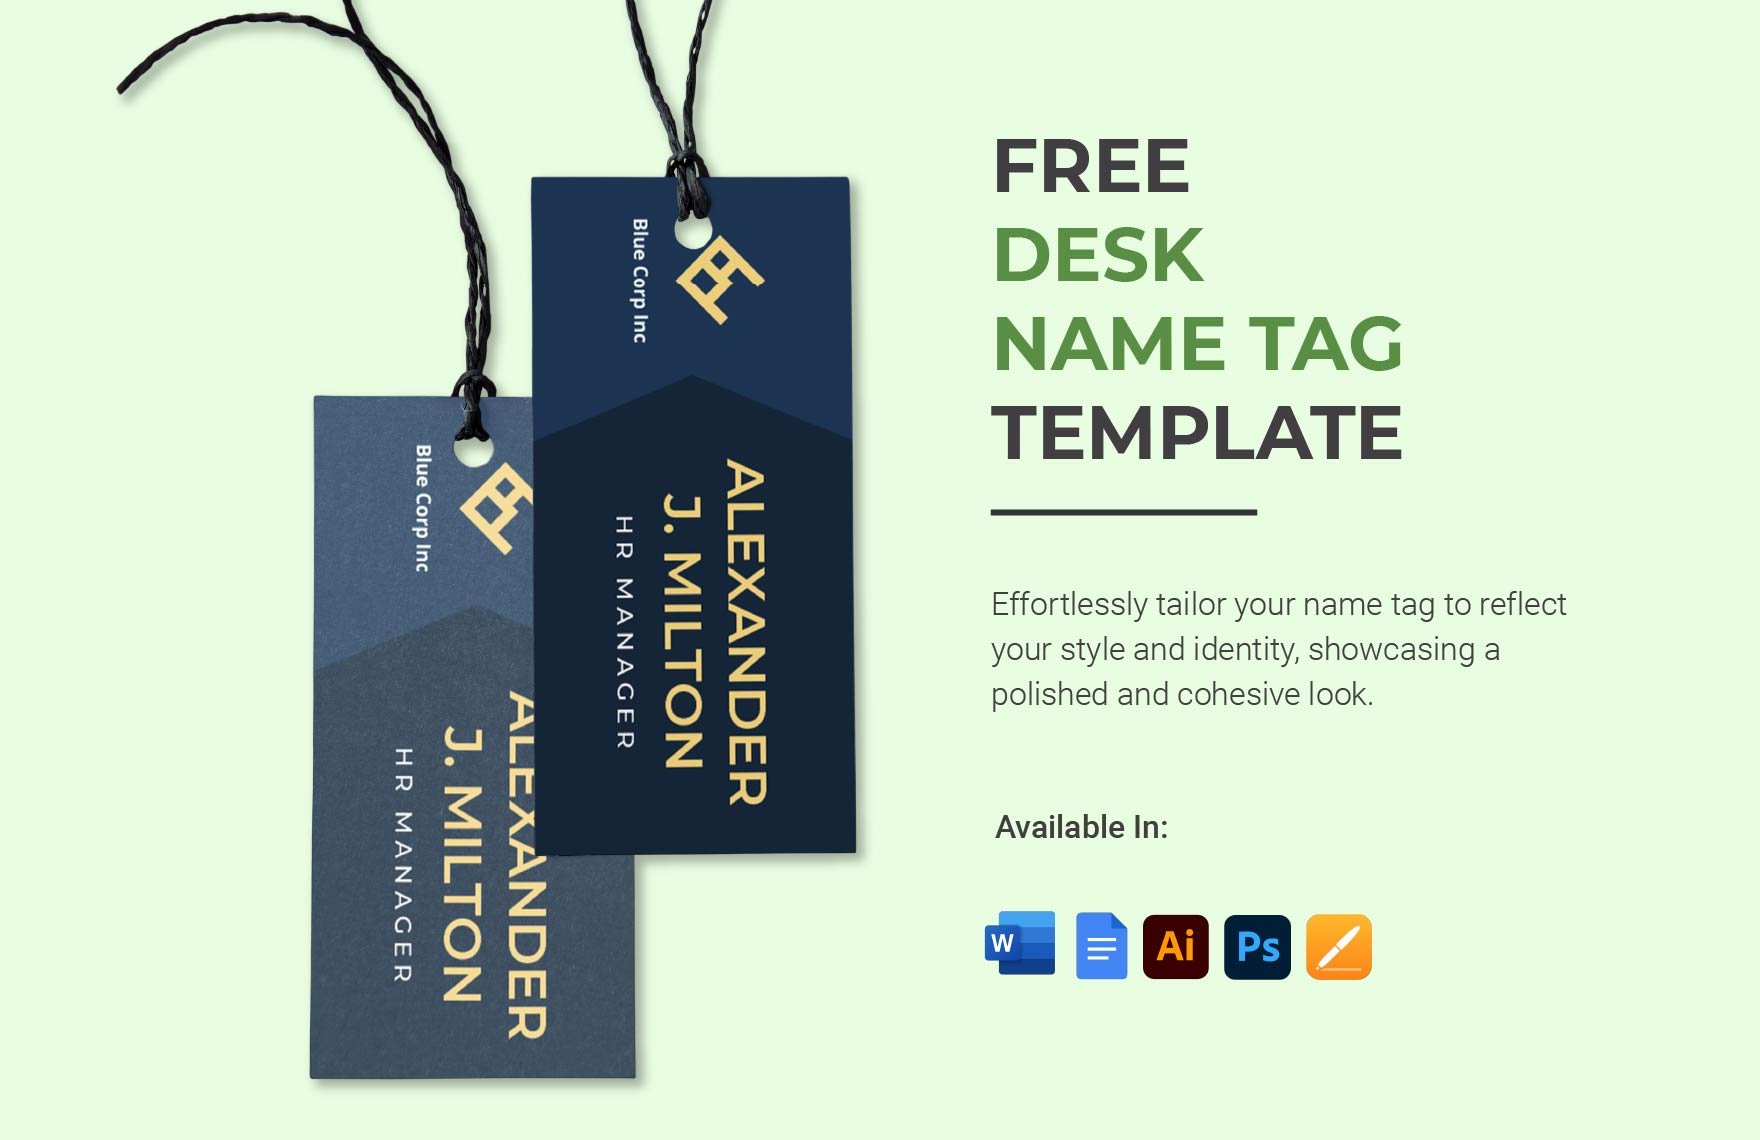 Desk Name Tag Template in Word, Google Docs, Illustrator, PSD, Apple Pages